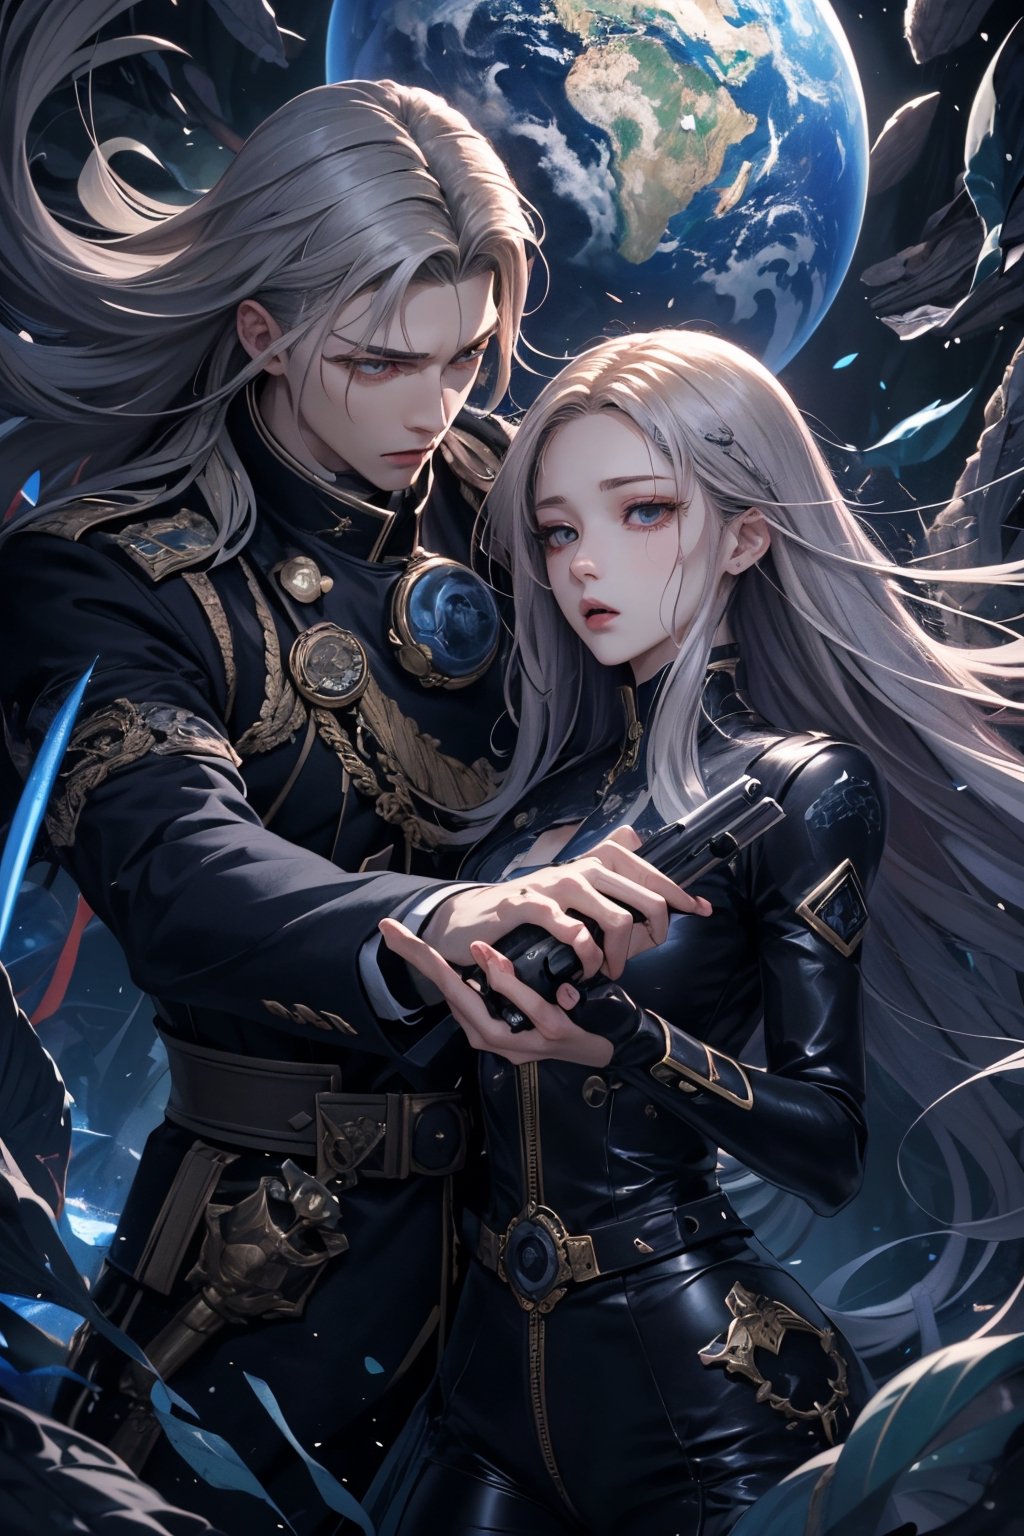 During the battle, the globe gets damaged, causing vivid holographic projections of possible future scenarios for Earth to appear around the protagonists. The male protagonist, with sleek silver-gray hair, reacts with shock while still firing his weapon. The female protagonist, her long golden hair flowing, looks on in awe at the unfolding visions, which include flourishing forests and devastated cities. The surrounding rebels pause, captivated by the images. This mix of high-energy combat and reflective moments captures both the action and the speculative sci-fi elements, presented in a detailed Korean manhwa style, vertical aspect ratio.